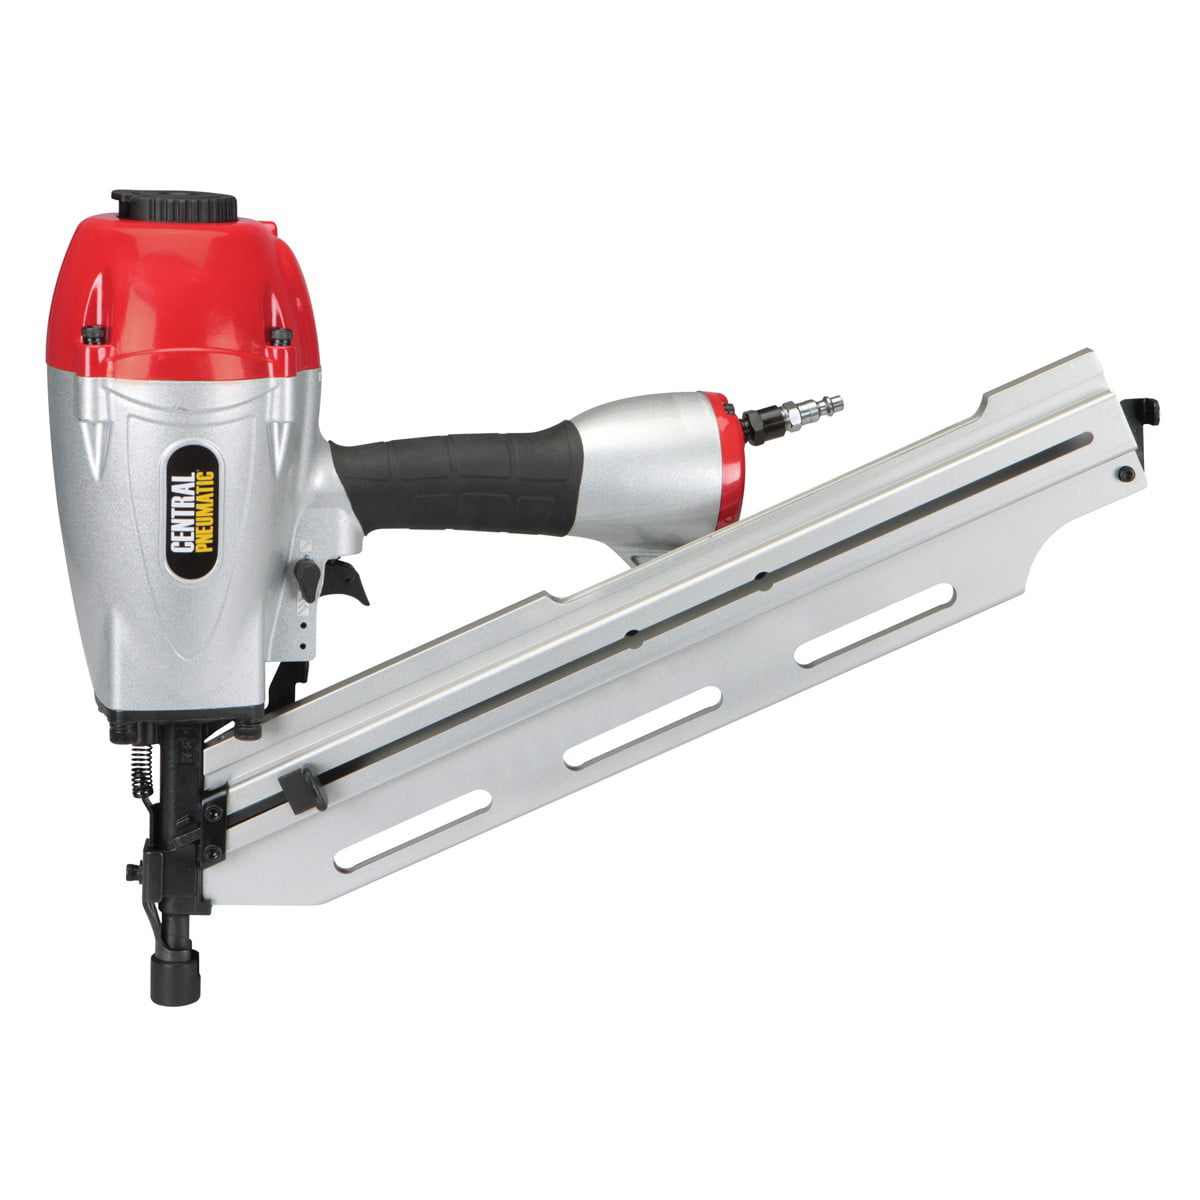 21 degree Plastic Collated Framing Nailer - F21PL | BOSTITCH